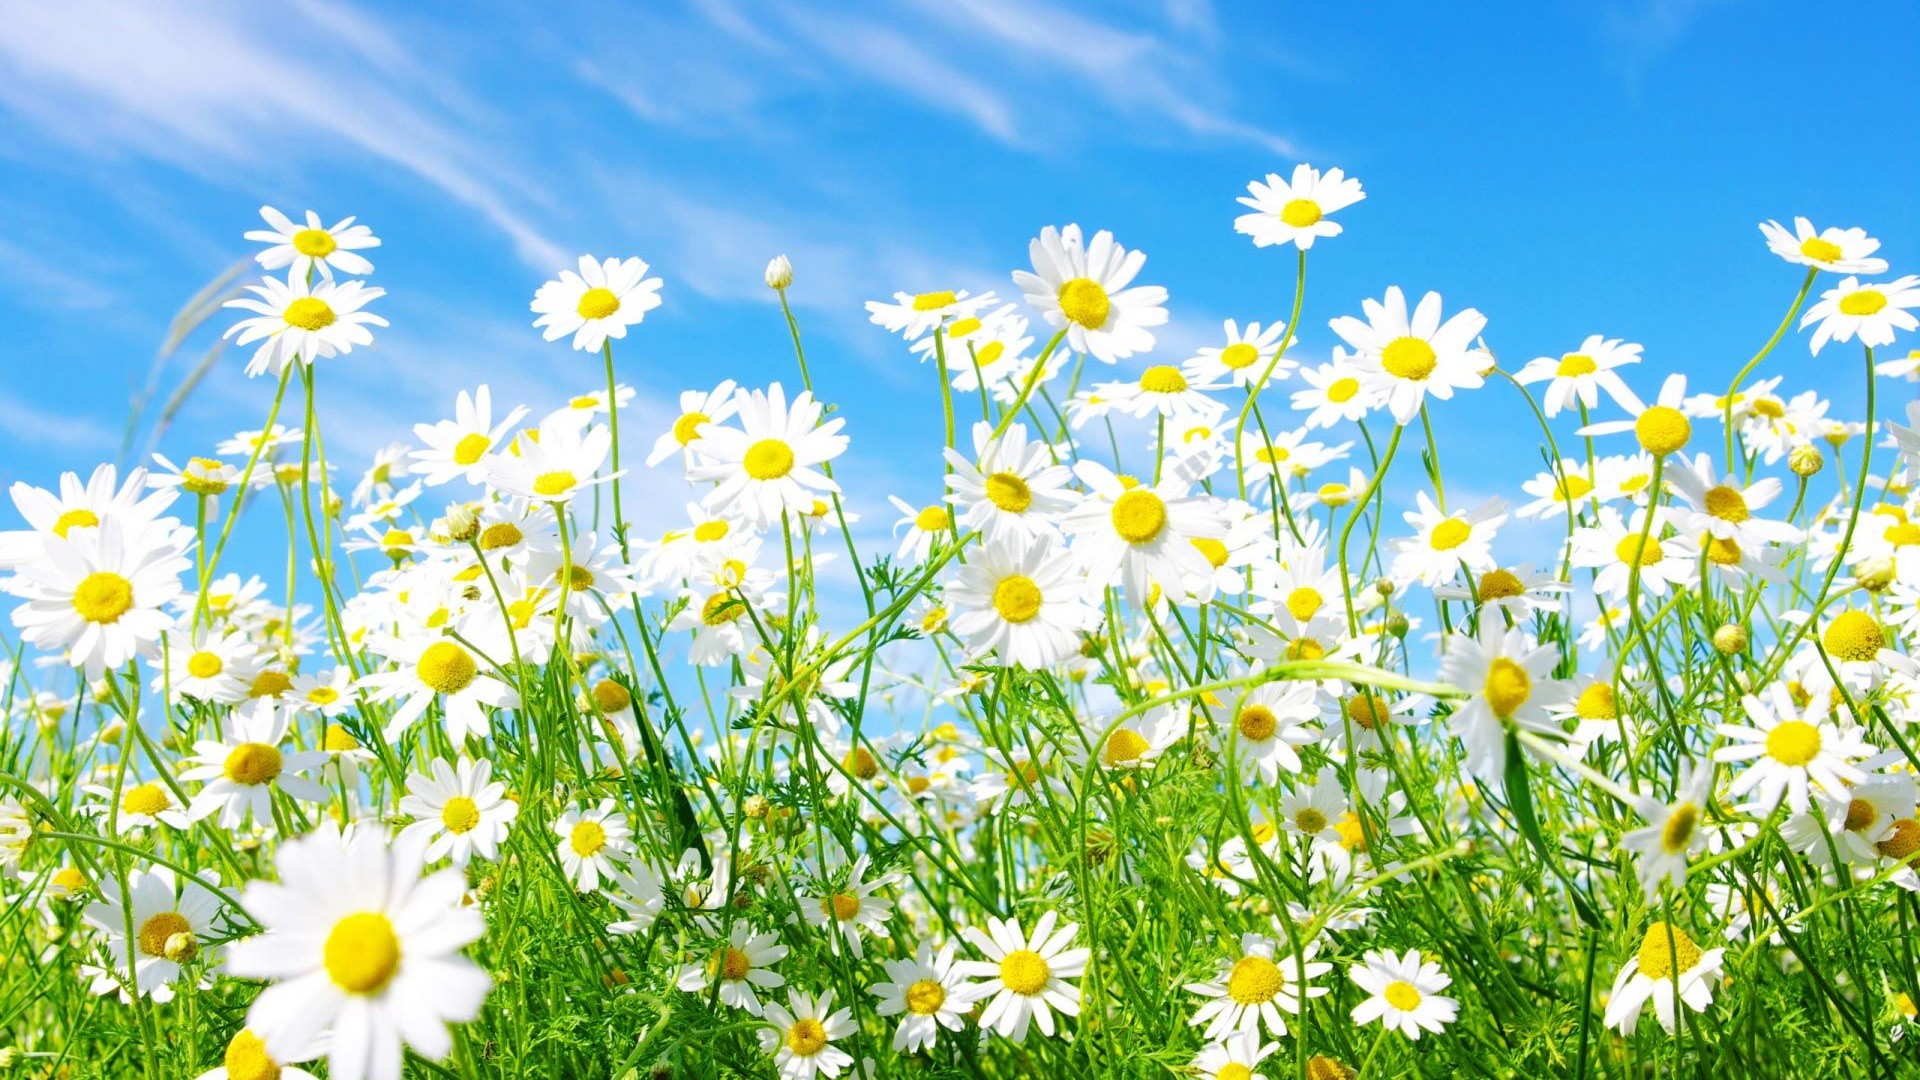 HD Spring Flowers Backgrounds | 2021 Cute Wallpapers